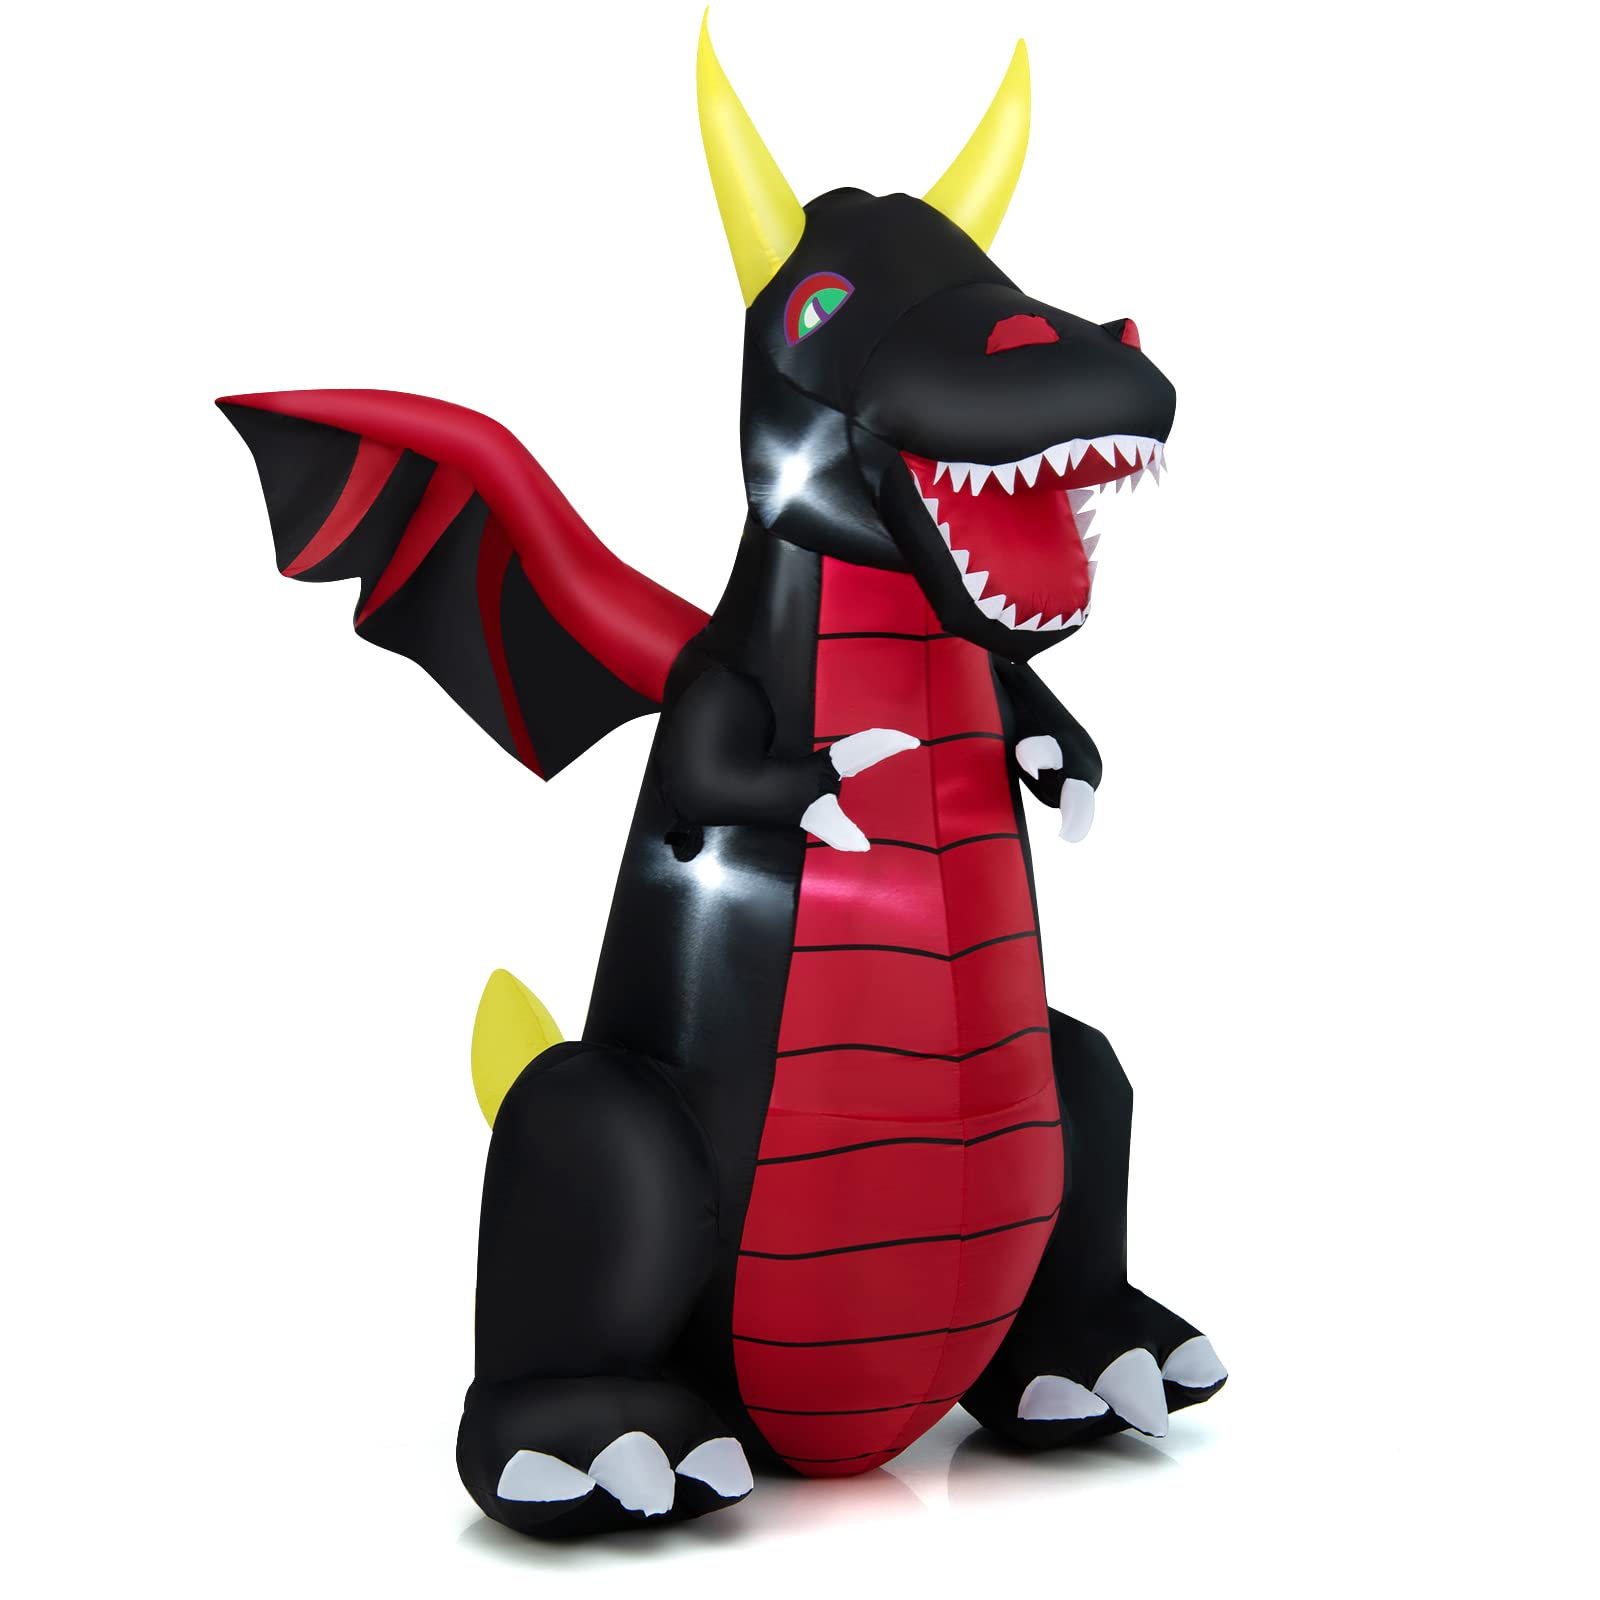 Tangkula 8 FT Tall Halloween Inflatable Decoration, Outdoor Blow Up Giant Dragon w/ Wings, Bright LED Lights